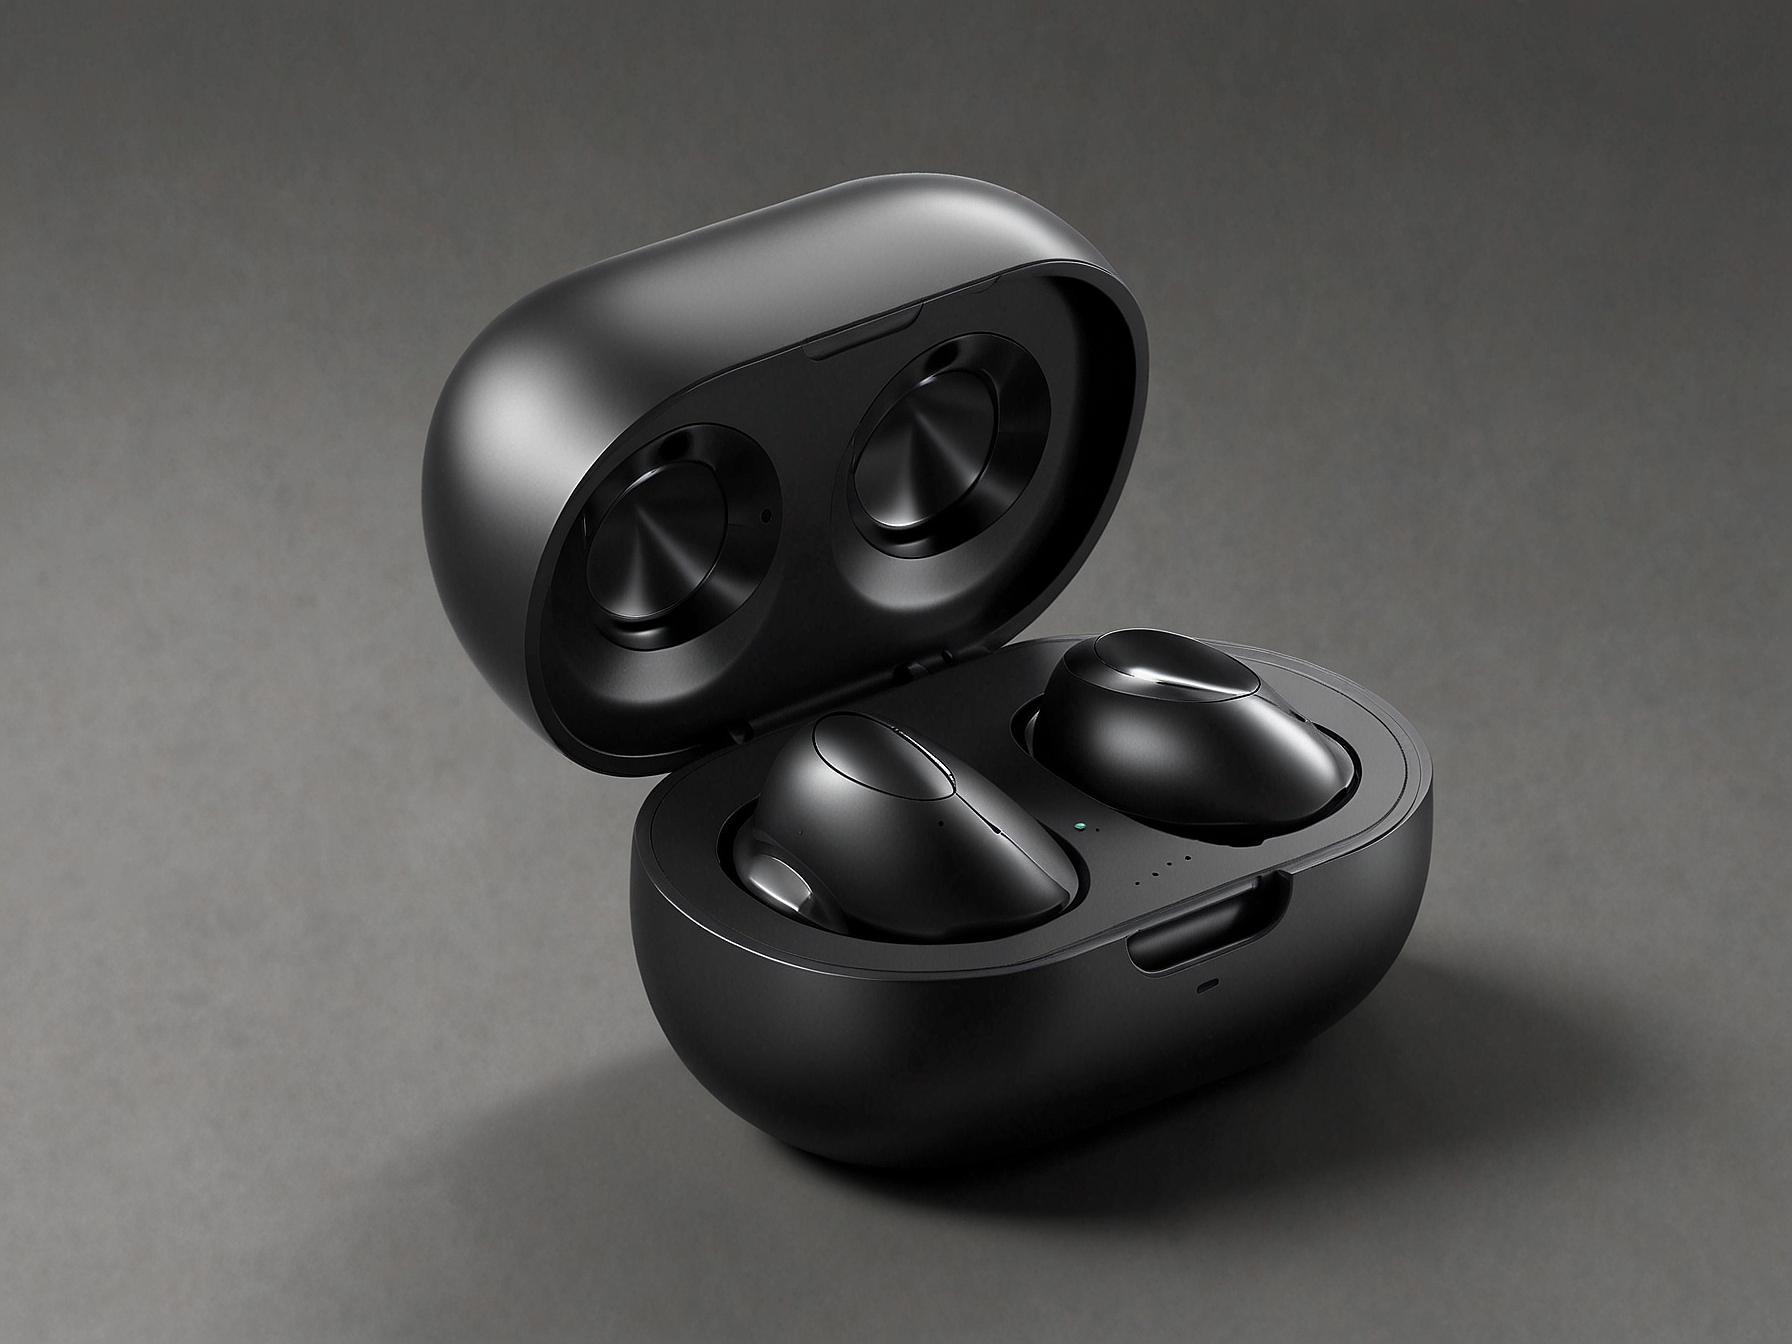 The redesigned charging case for the Samsung Galaxy Buds 3 features a slimmer, more compact profile with enhanced magnetic closures, ensuring easy portability and secure storage.